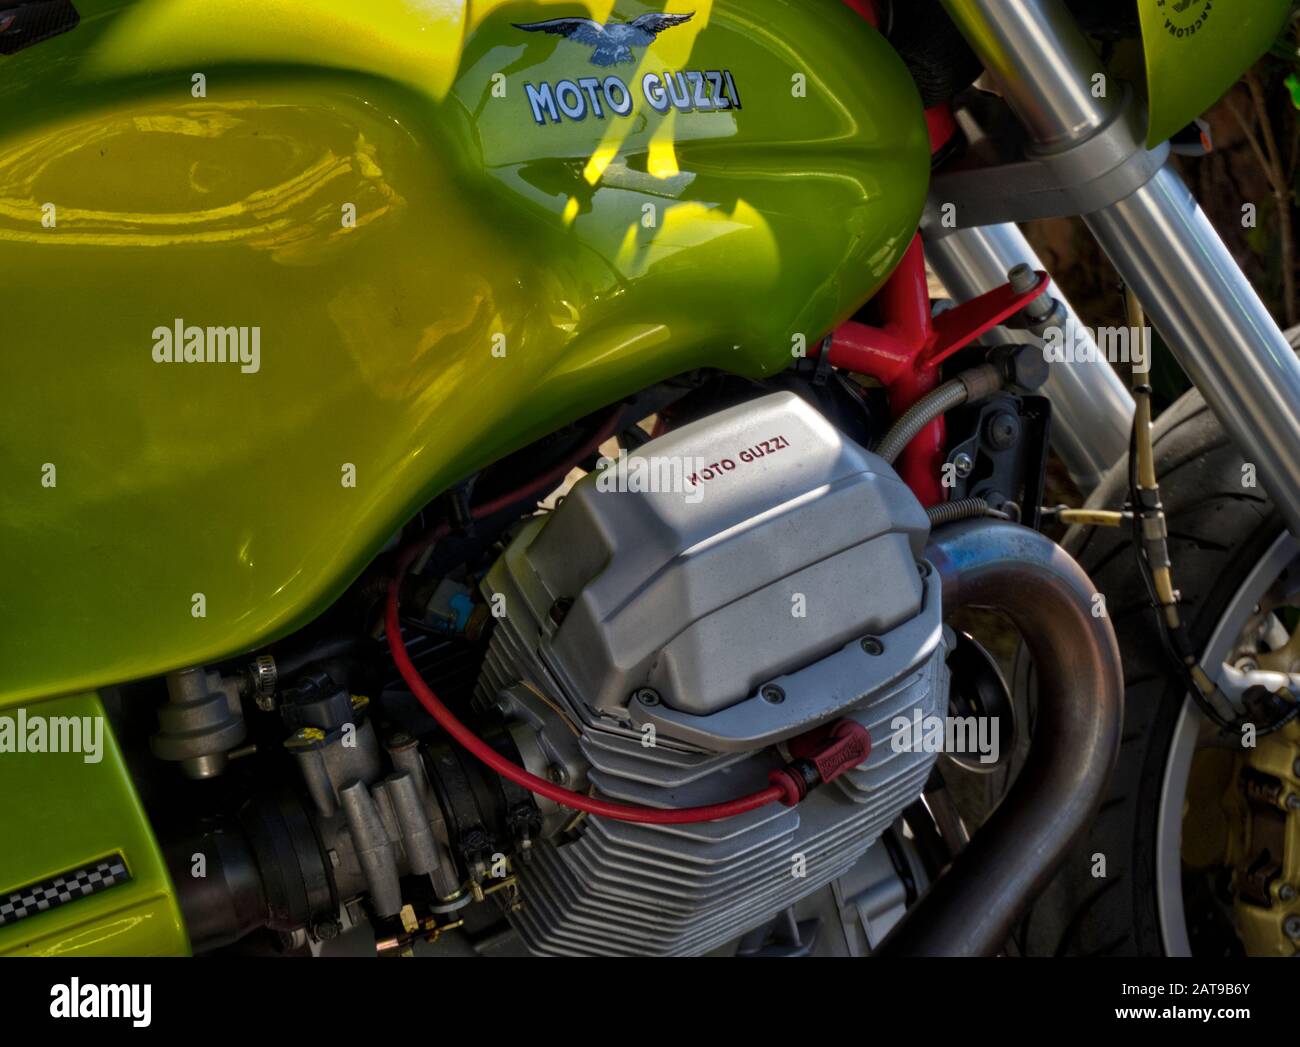 Rimini, Italy - October 20, 2019: Close up of lime green Moto Guzzi motorcycle petrol tank and cylinder head Stock Photo